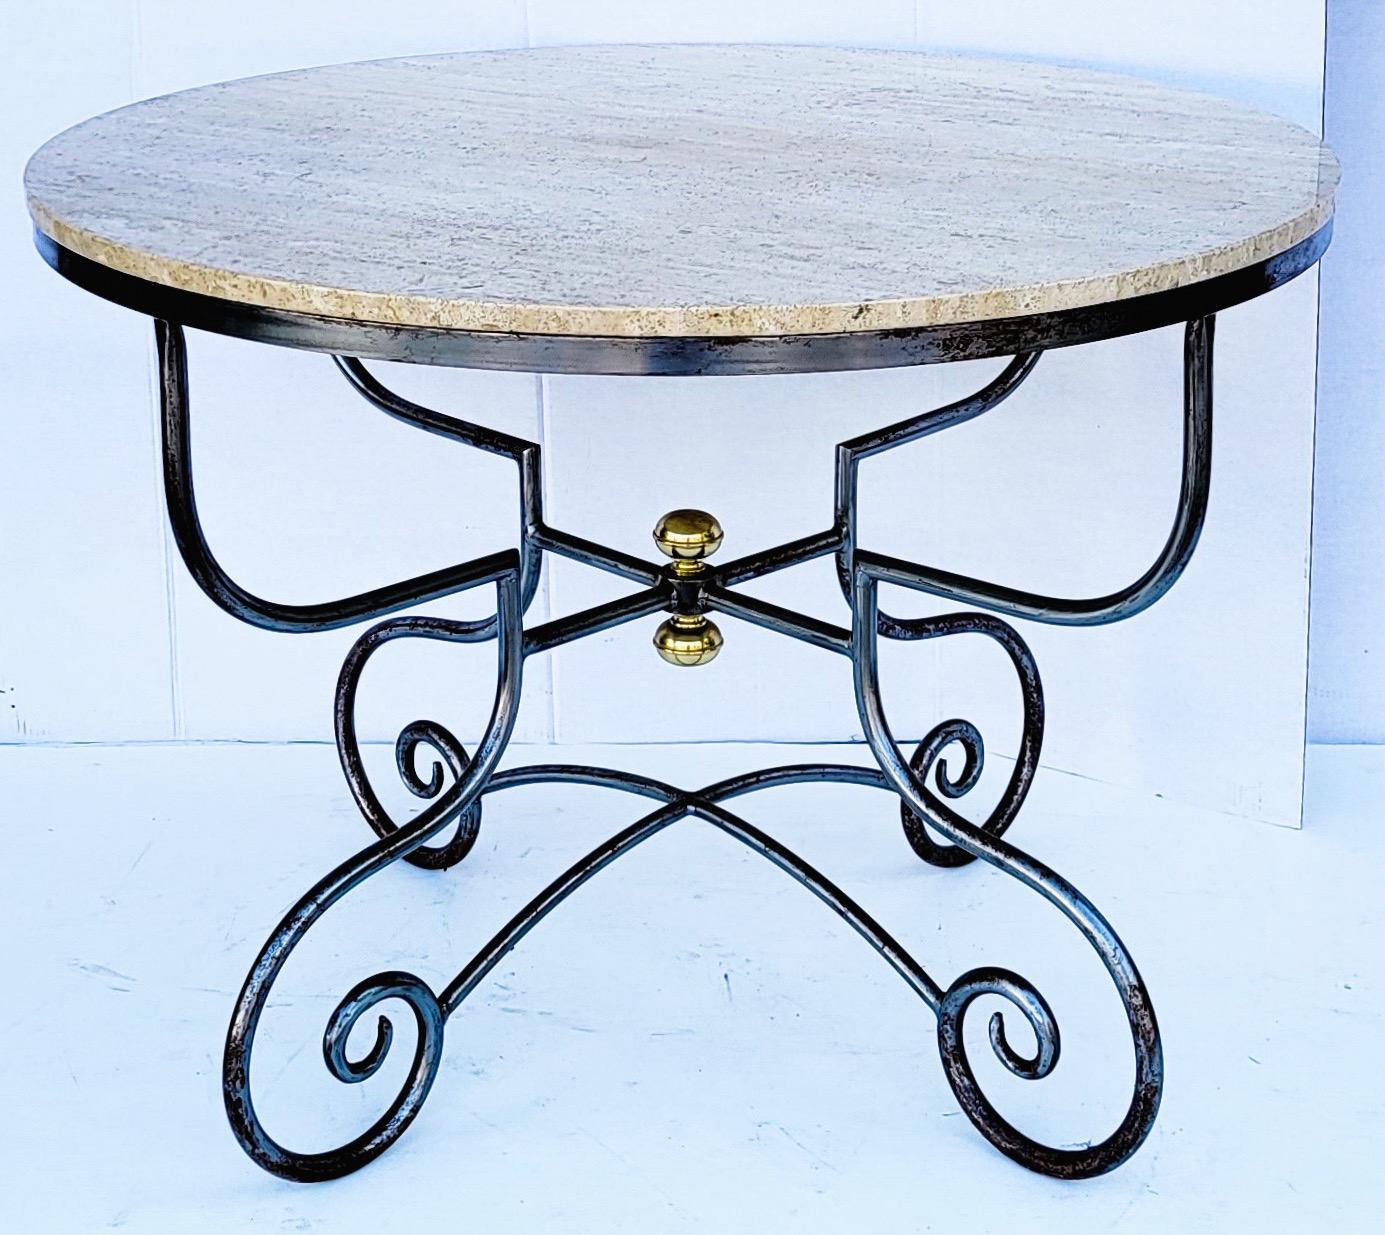 20th Century French Neo-Classical Style Steel, Brass and Stone Center or Dining Table